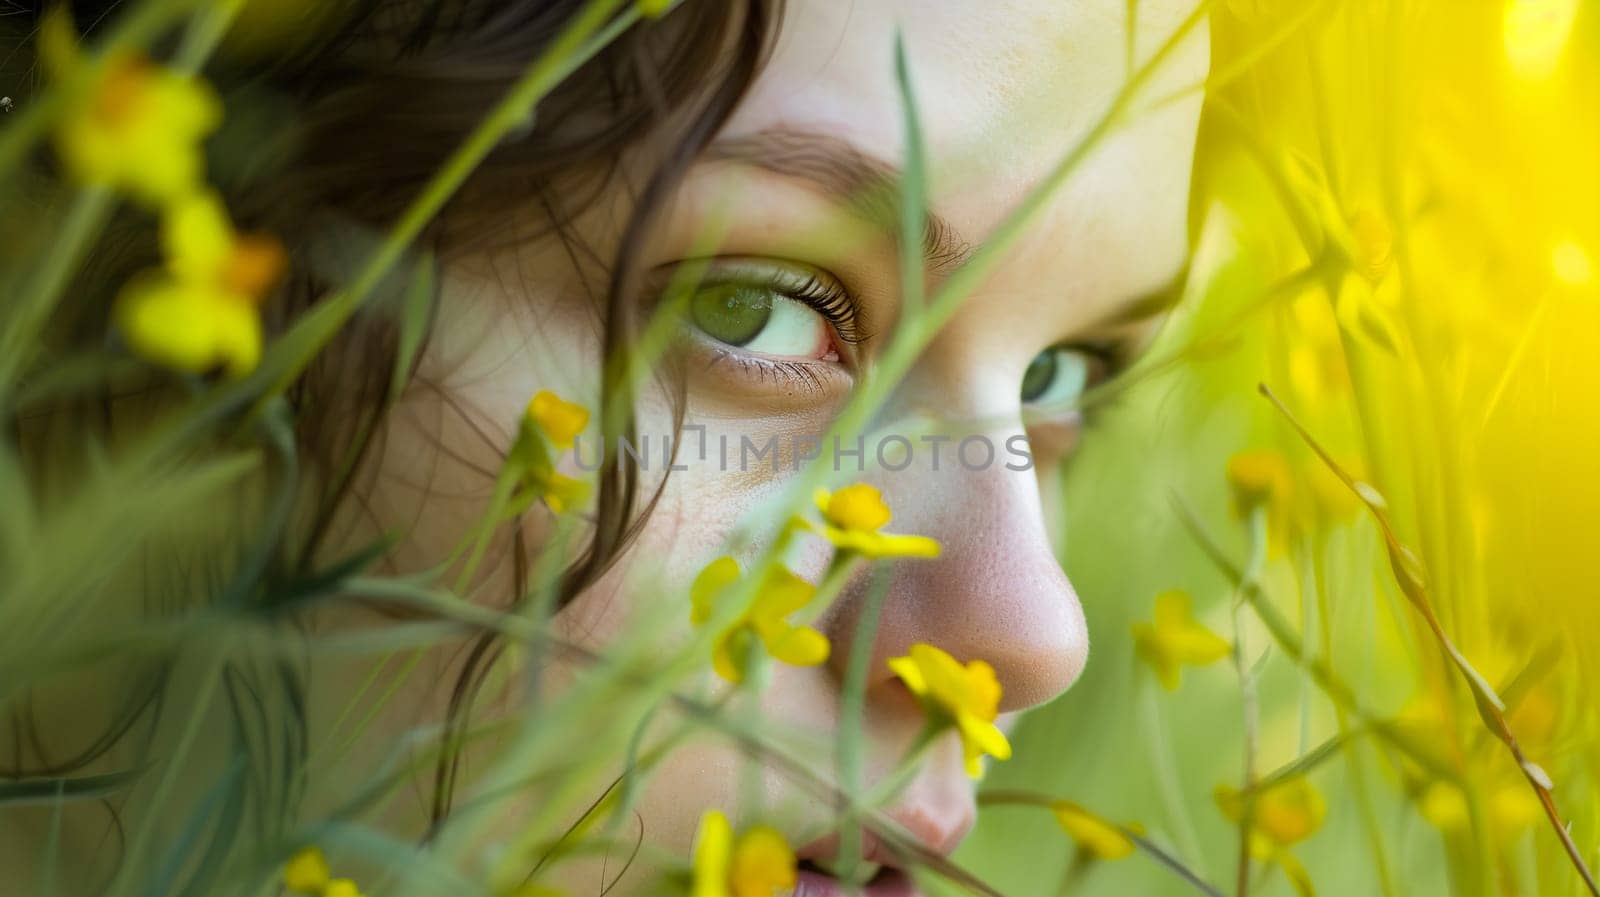 Woman With Green Eyes Standing in a Field of Yellow Flowers by chrisroll